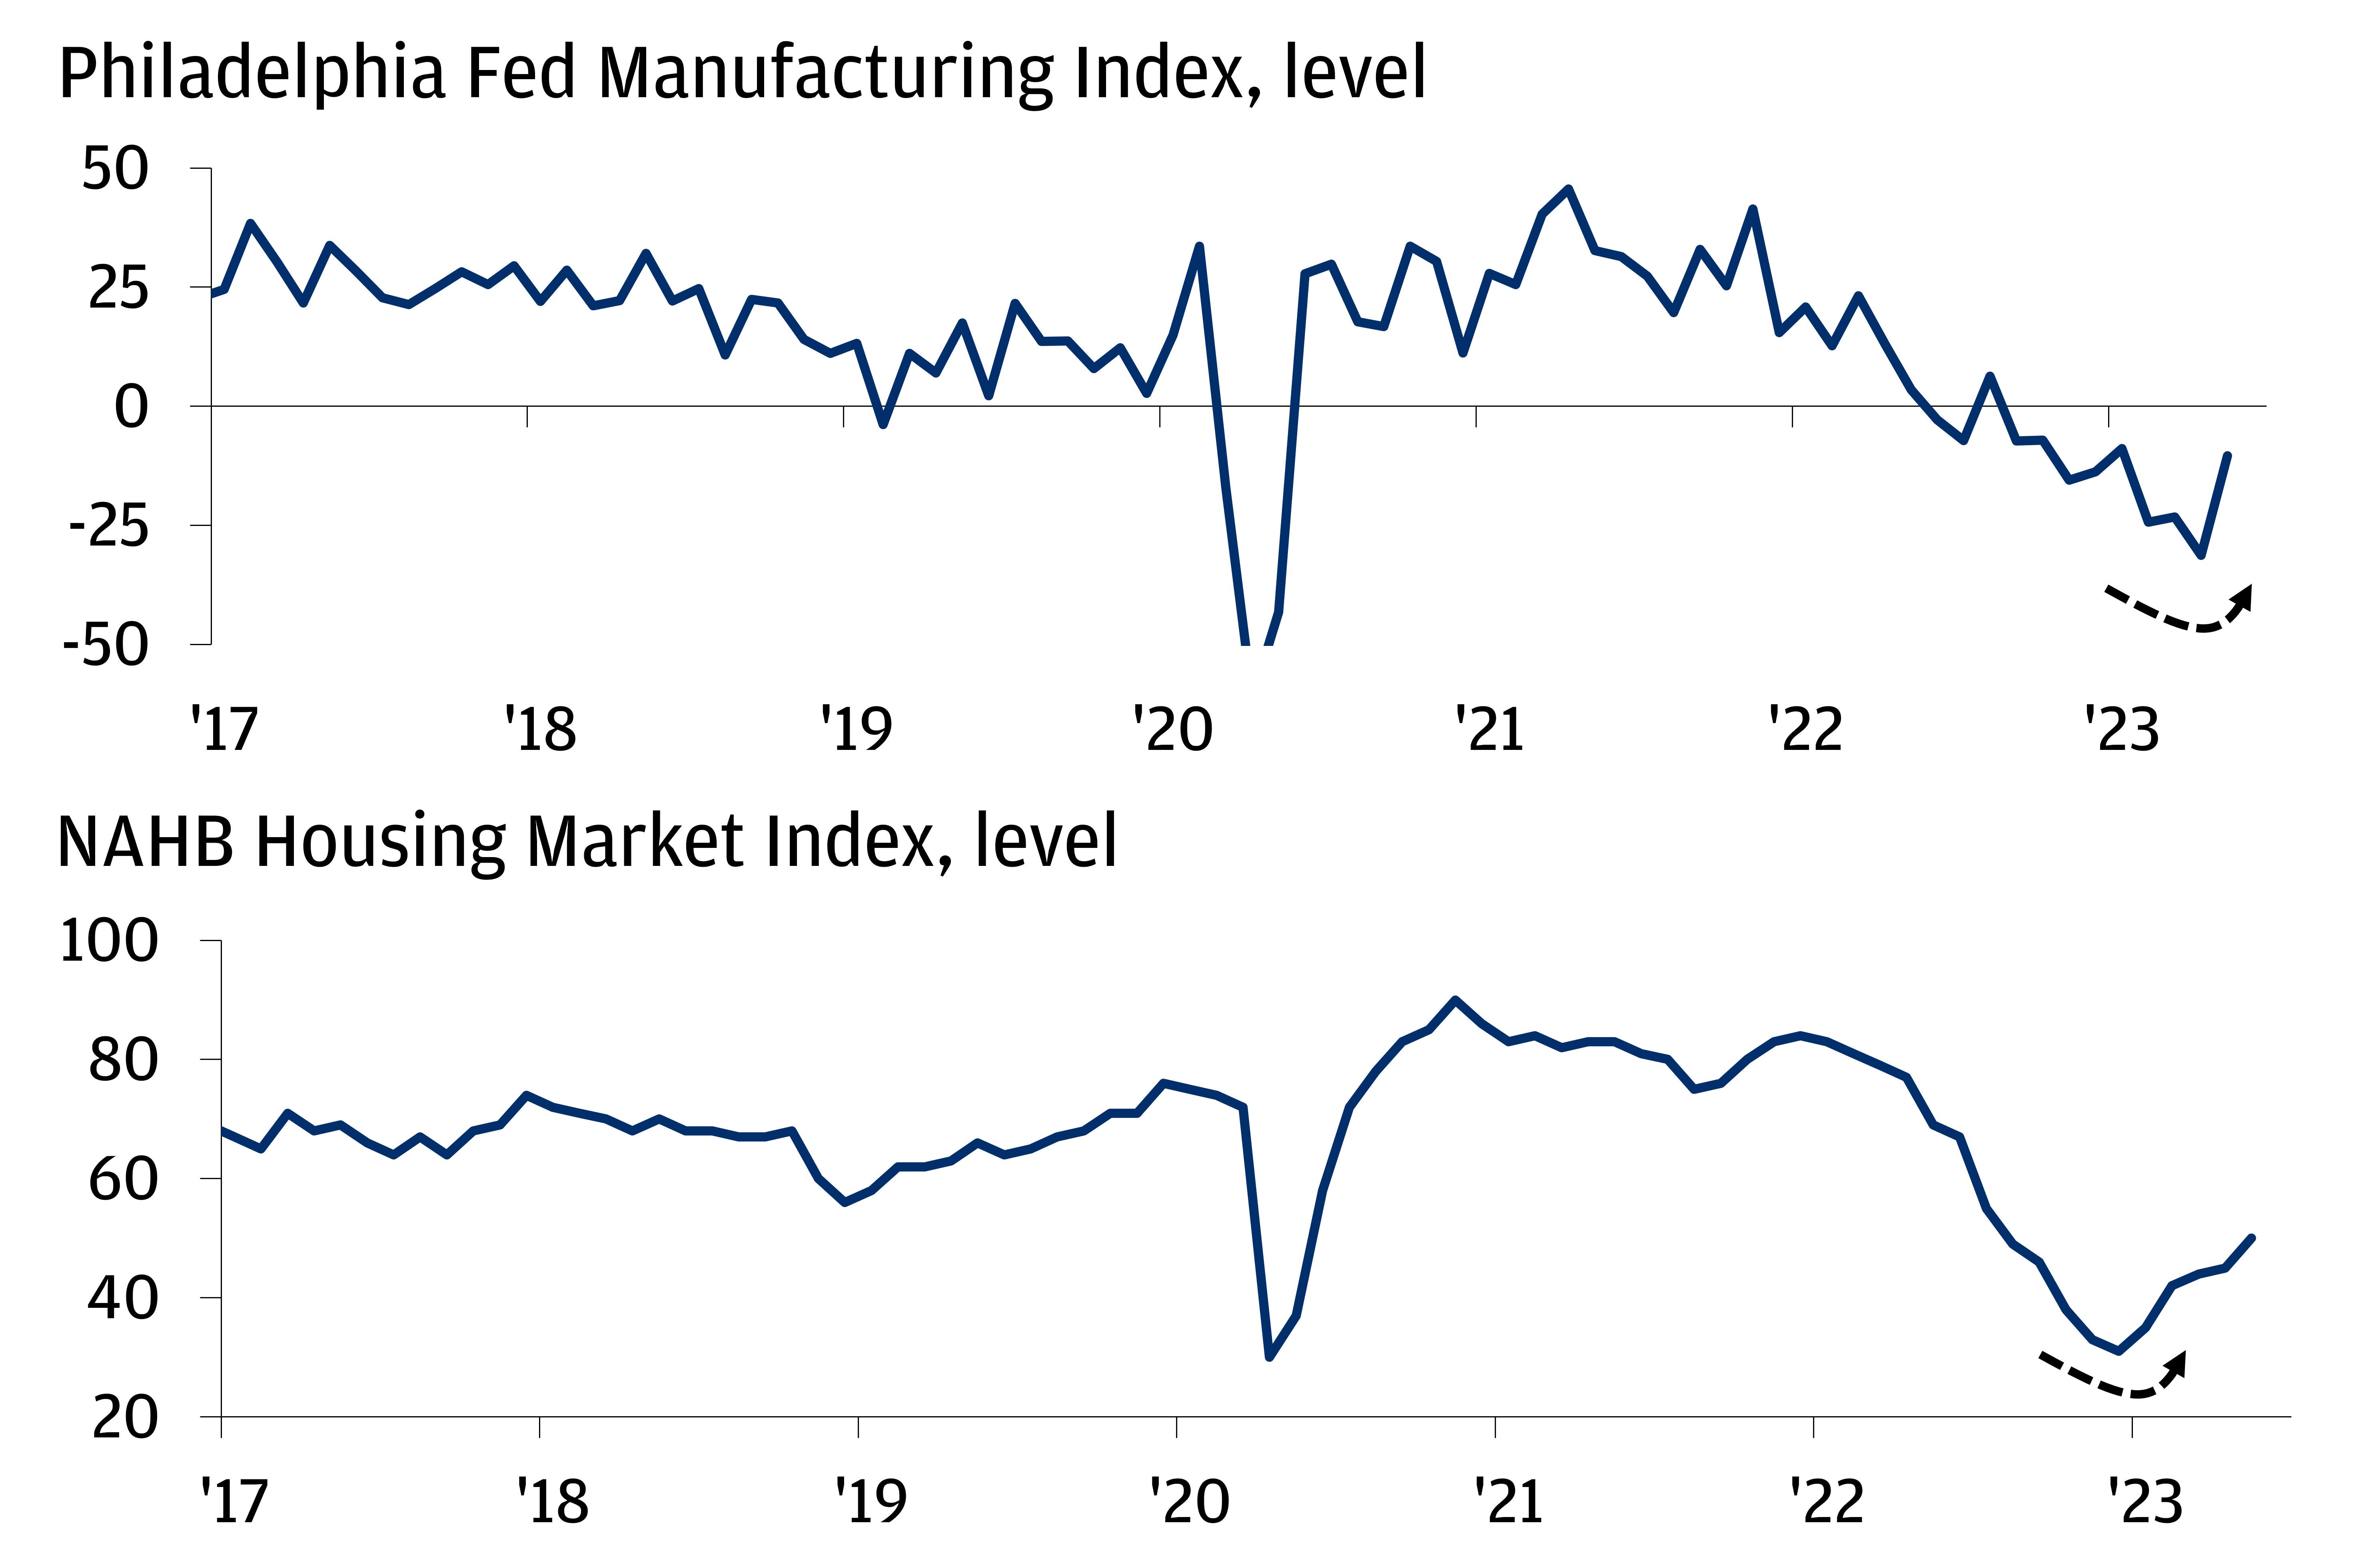 The chart is split into two charts. The top chart describes the Philadelphia Fed Manufacturing Index, while the bottom chart describes the NAHB Housing Market Index. 